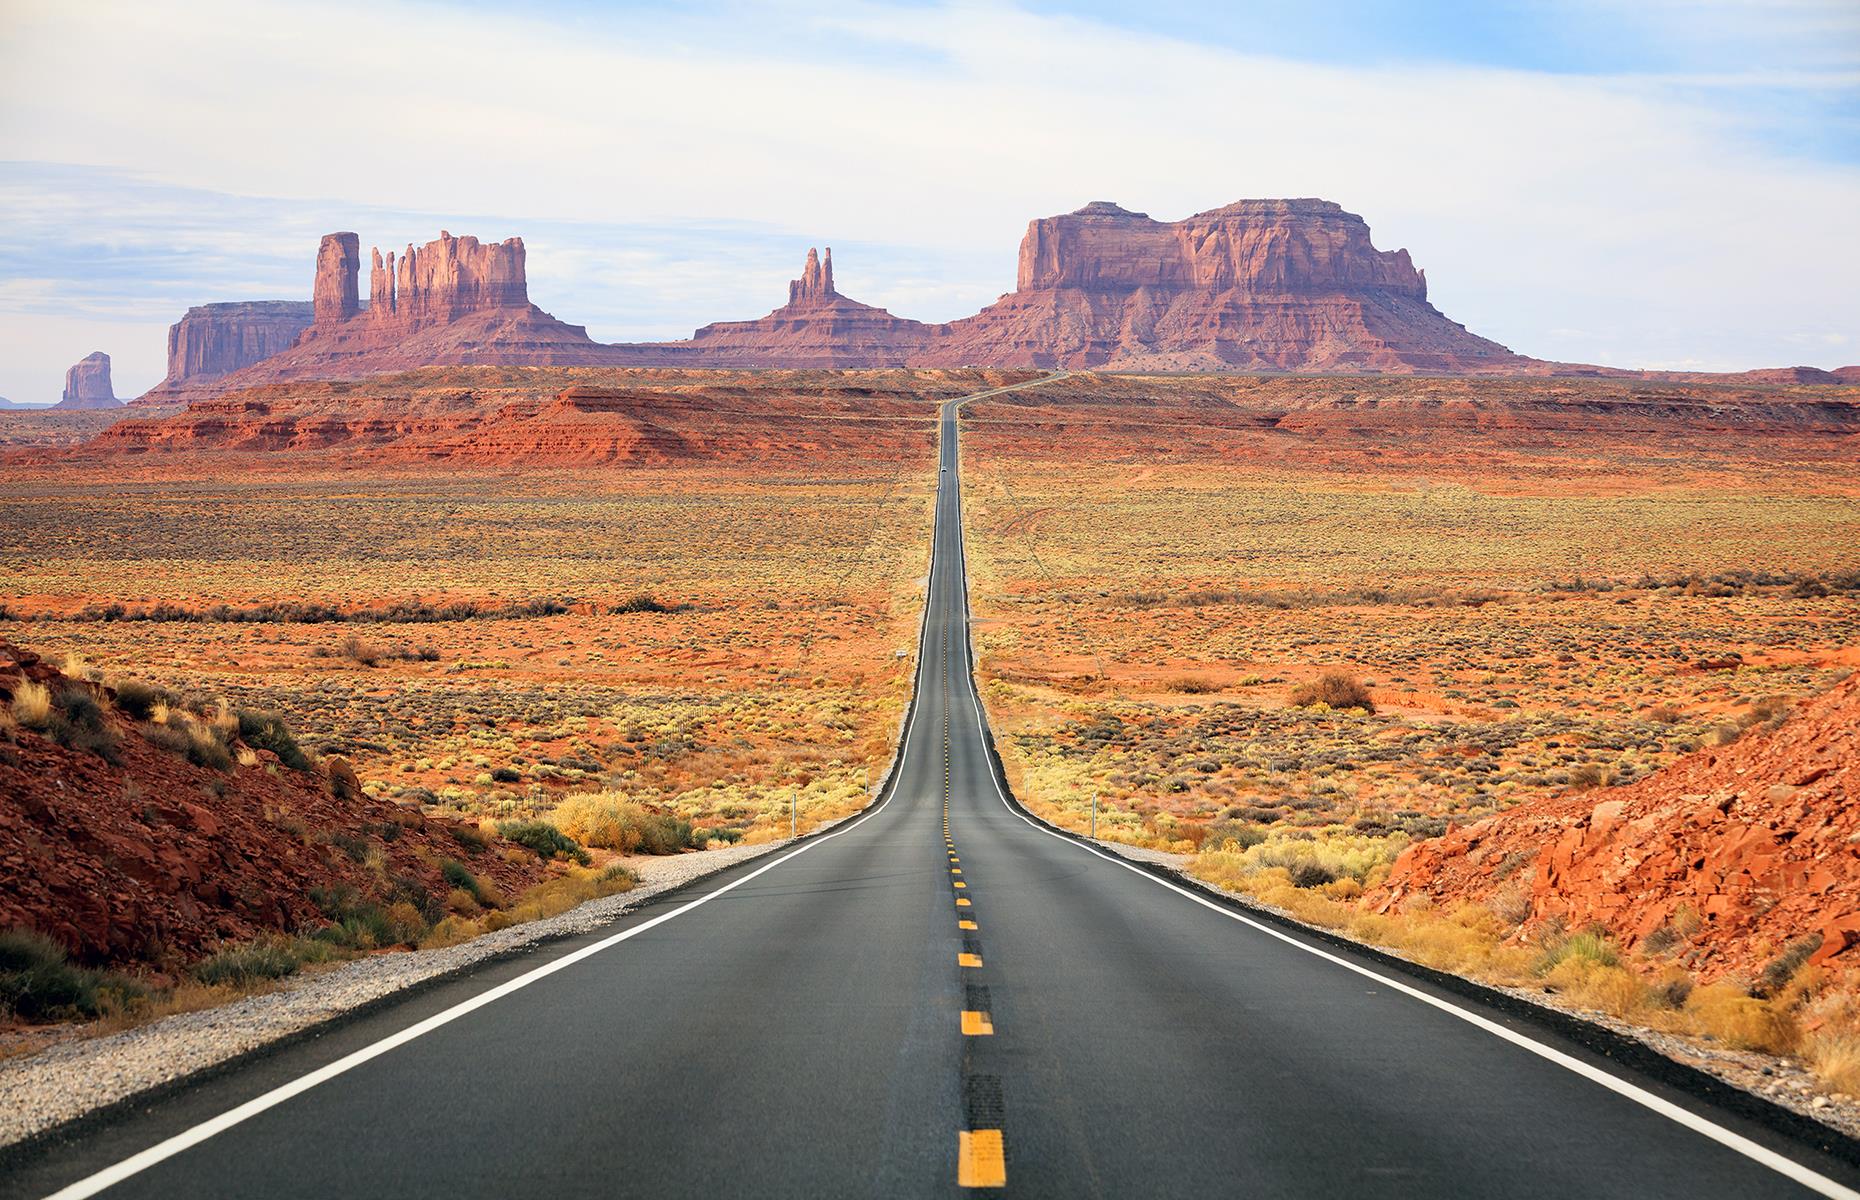 <p>From Route 66 to a meandering journey through the Deep South, the USA is ripe for road trips. Just remember, in the land of kitsch diners and roadside attractions, you'll need plenty of time for detours. </p>  <p><a href="https://www.loveexploring.com/galleries/65669/unusual-things-youll-find-on-a-road-trip-through-the-usa?page=1"><strong>These roadside attractions are well worth traveling to</strong></a></p>